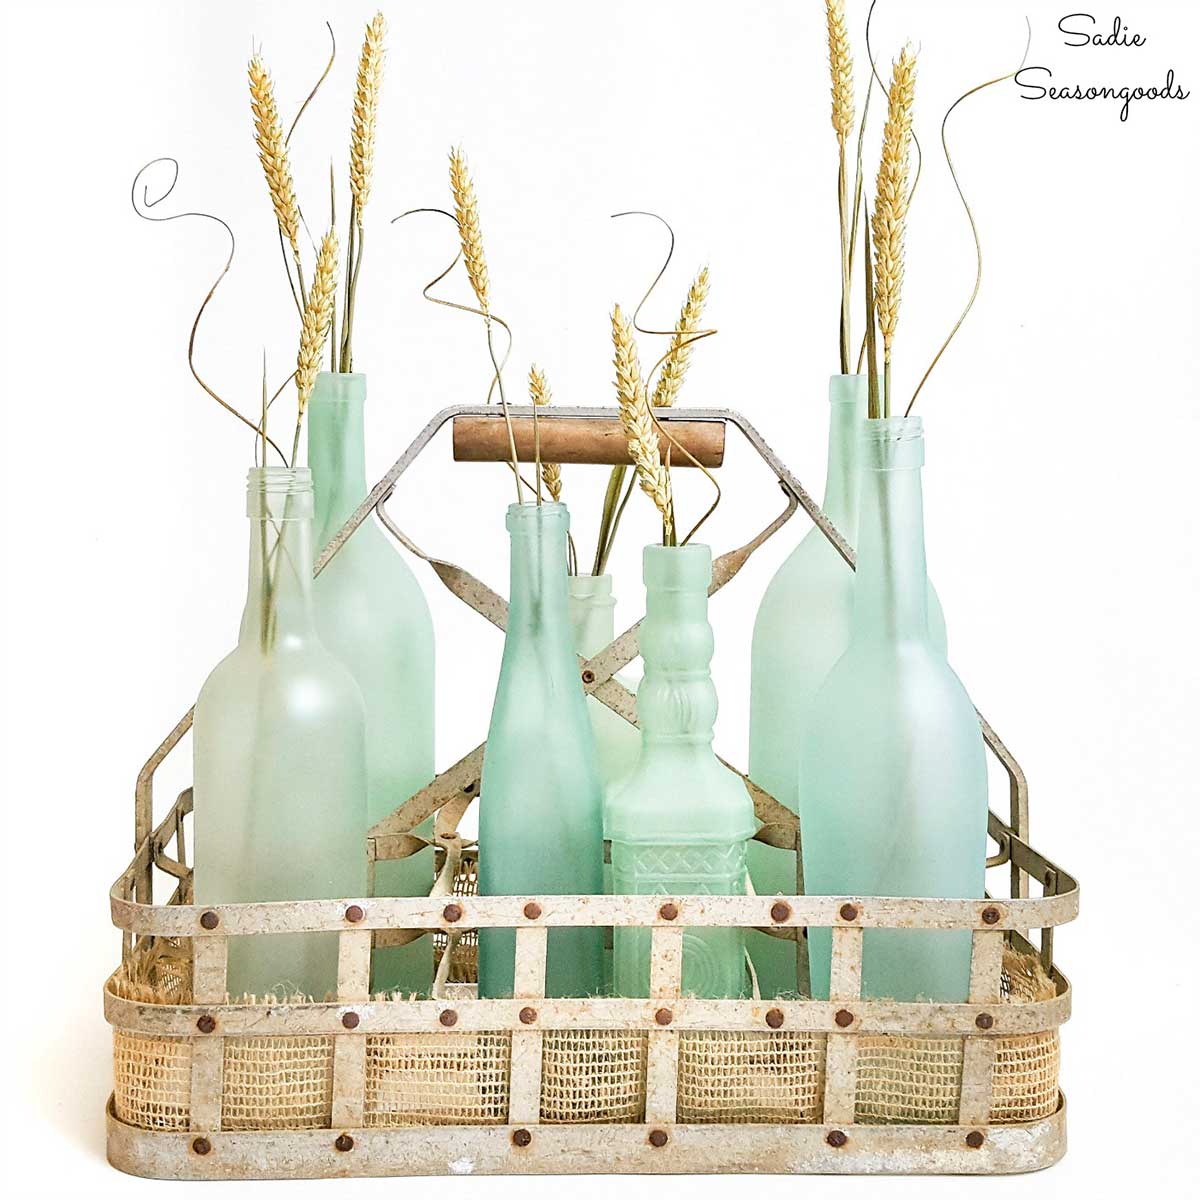 6 repurposed bottles painted in the color sea glass and sitting in a bottle carrier.